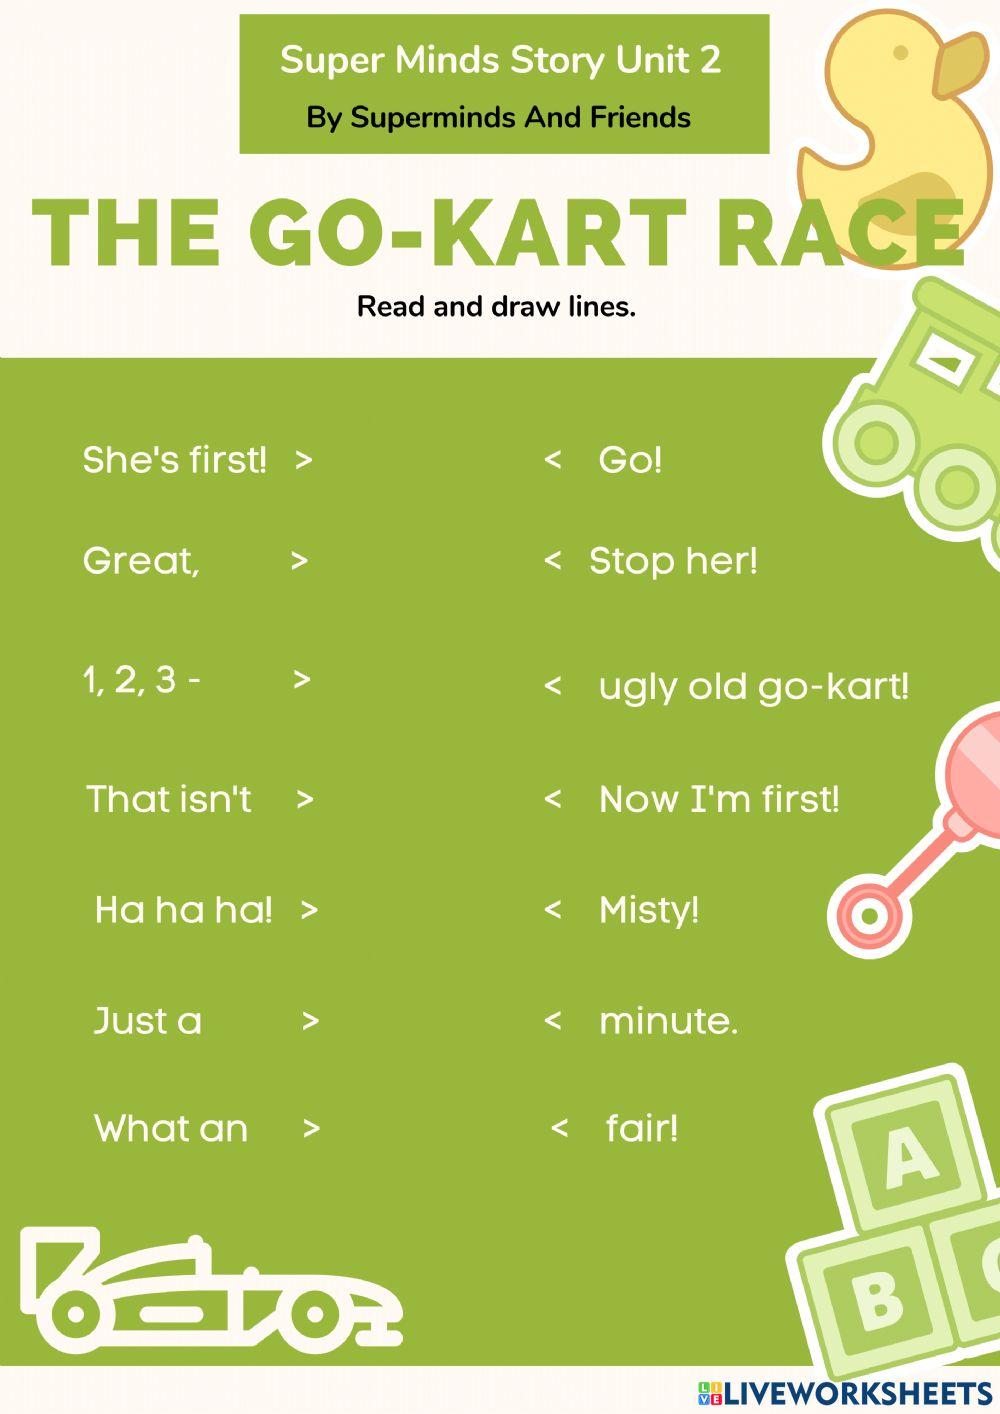 Super minds unit 2 story worksheet the go-kart race - let's play- value- fair play- cheating is wrong